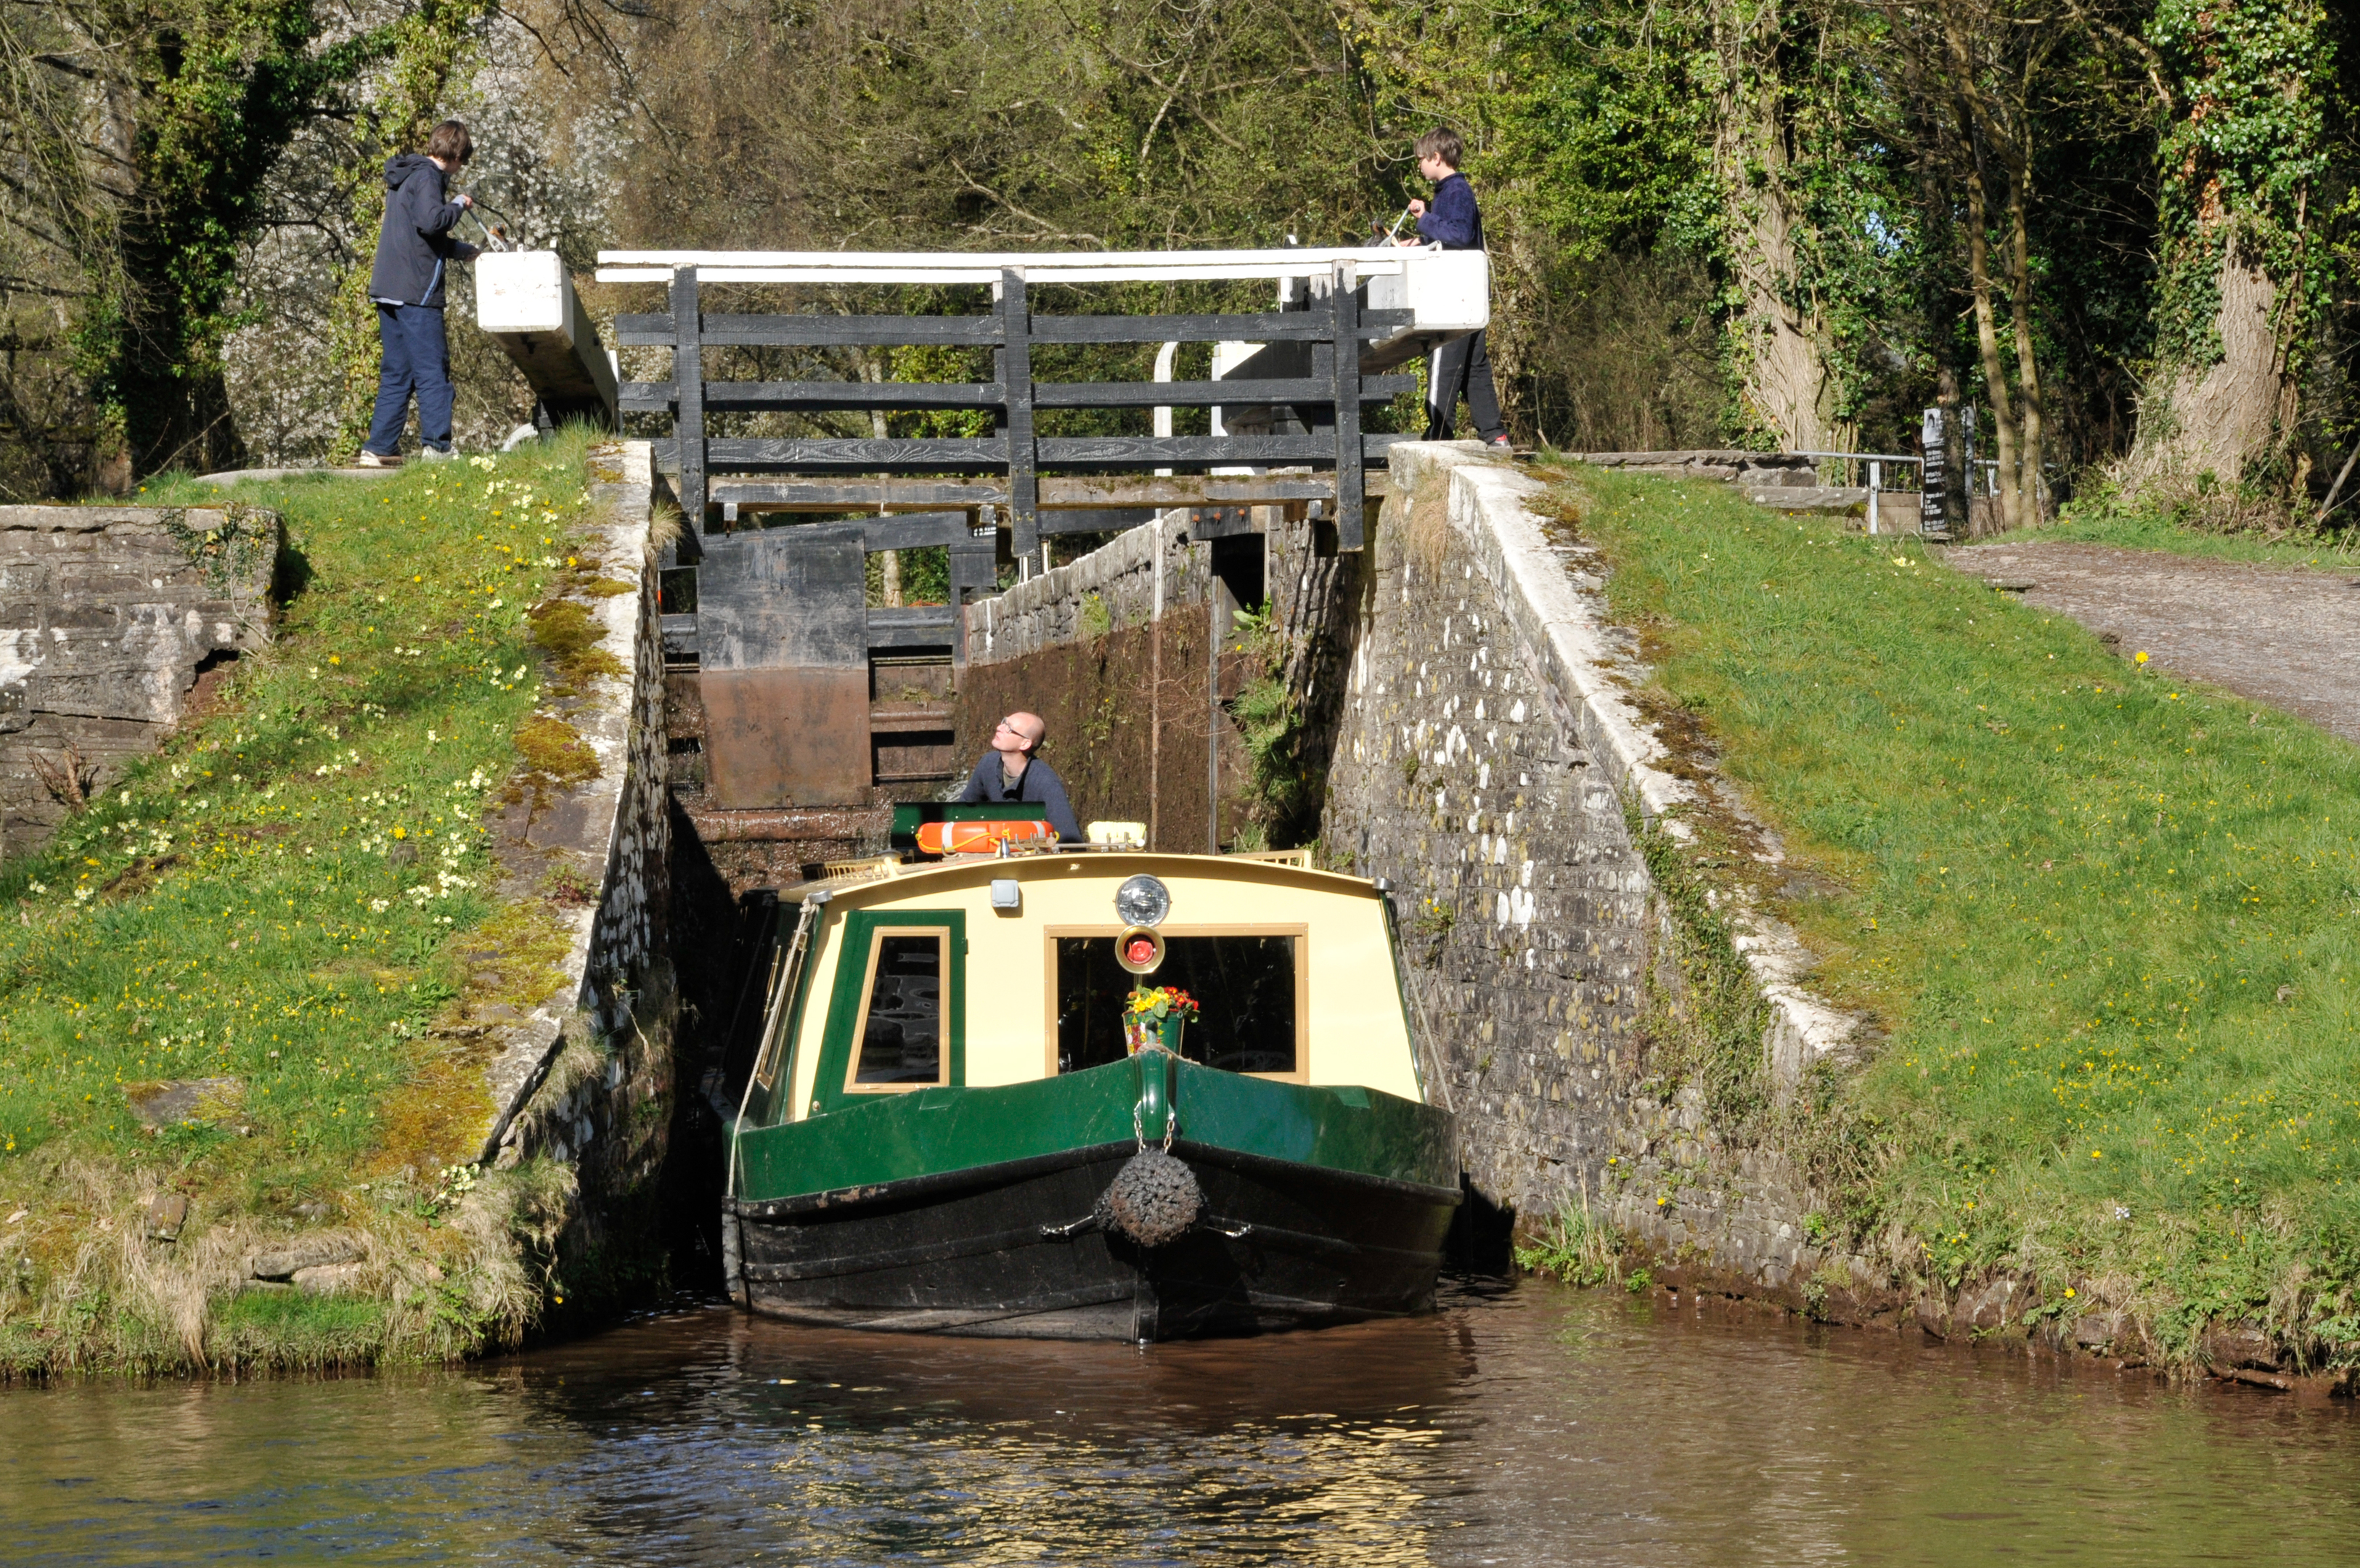 Monmouthshire & Brecon canal